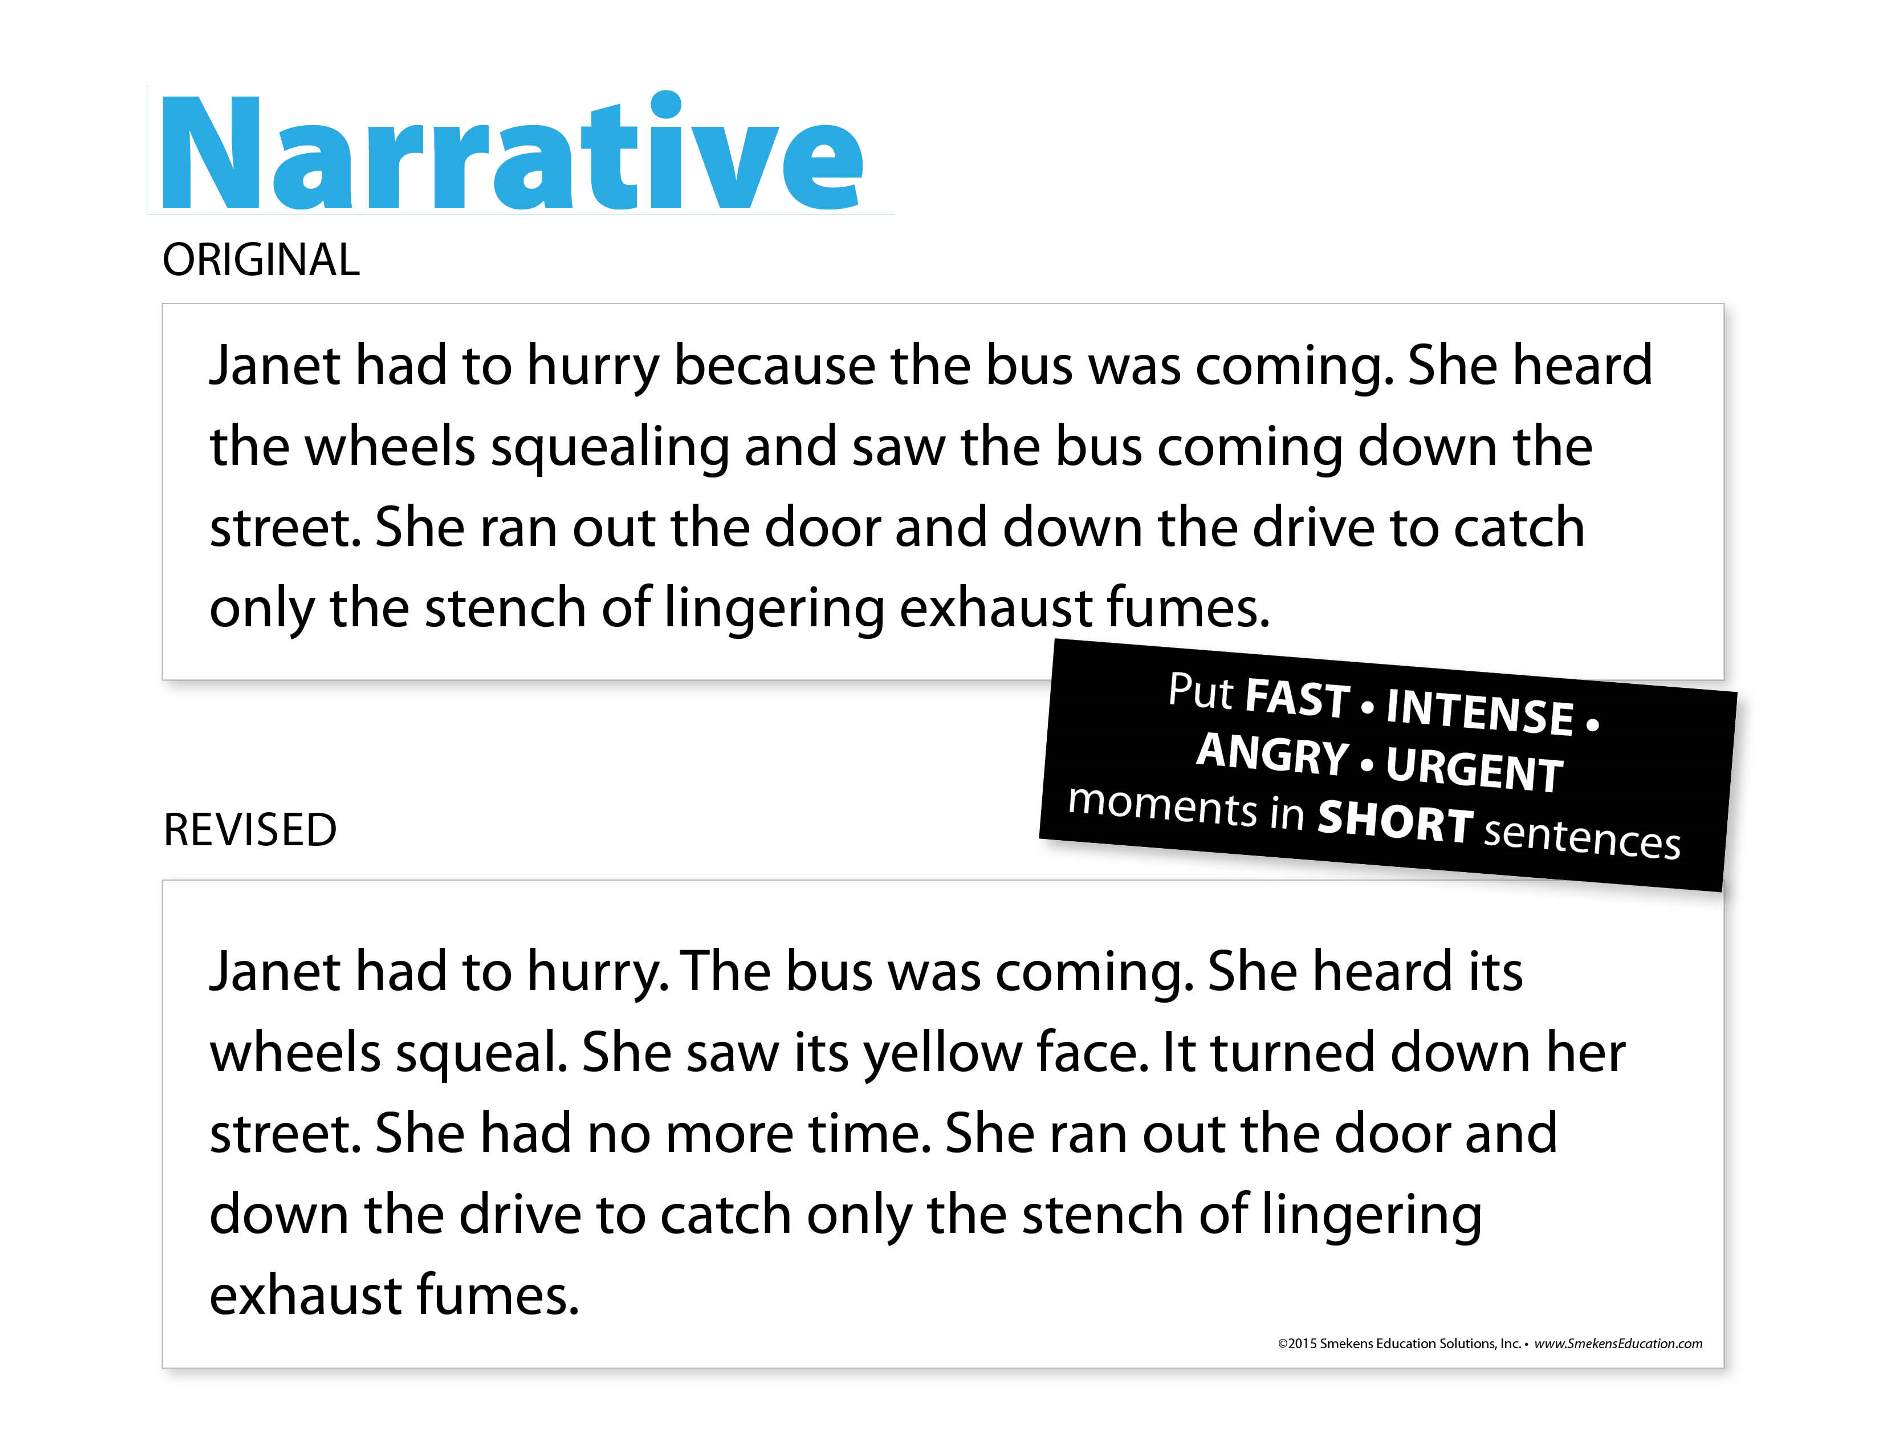 Narrative: Fast-Paced Narrative Example - Rushing to the bus